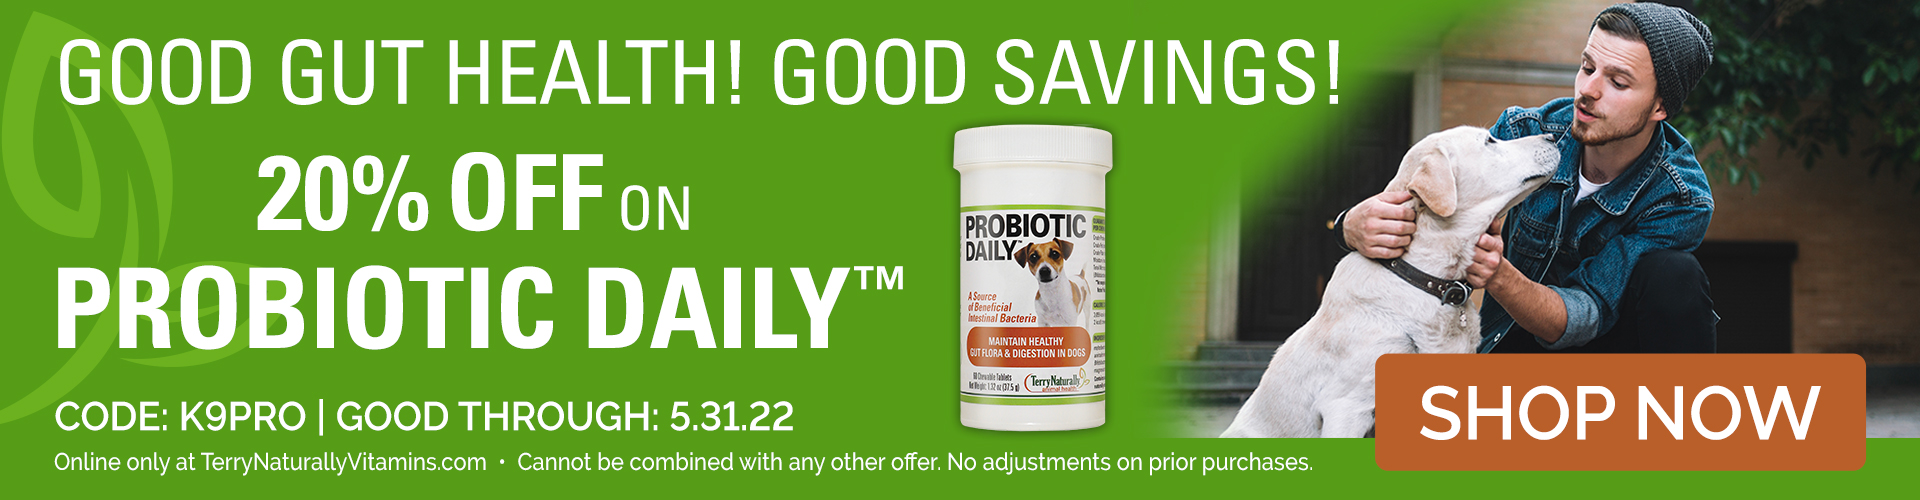 GOOD GUT HEALTH! GOOD SAVINGS! 20% OFF Probiotic Daily • SHOP NOW